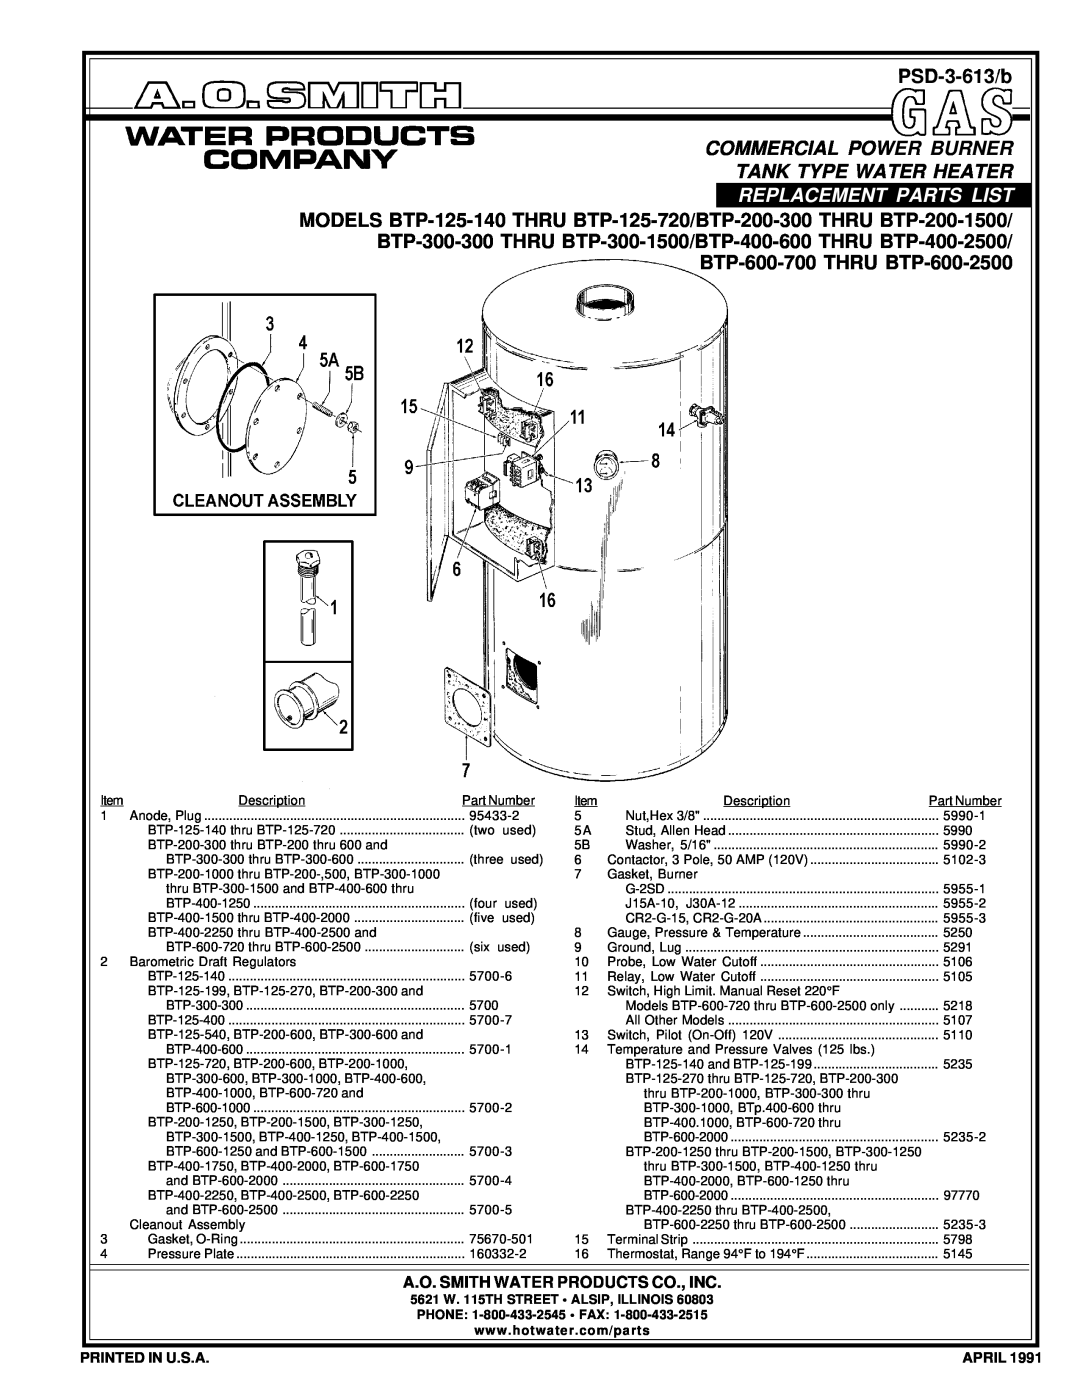 A.O. Smith BTP-200-1500 manual PSD-3-613/b, Commercial Power Burner Tank Type Water Heater, Replacement Parts List, April 